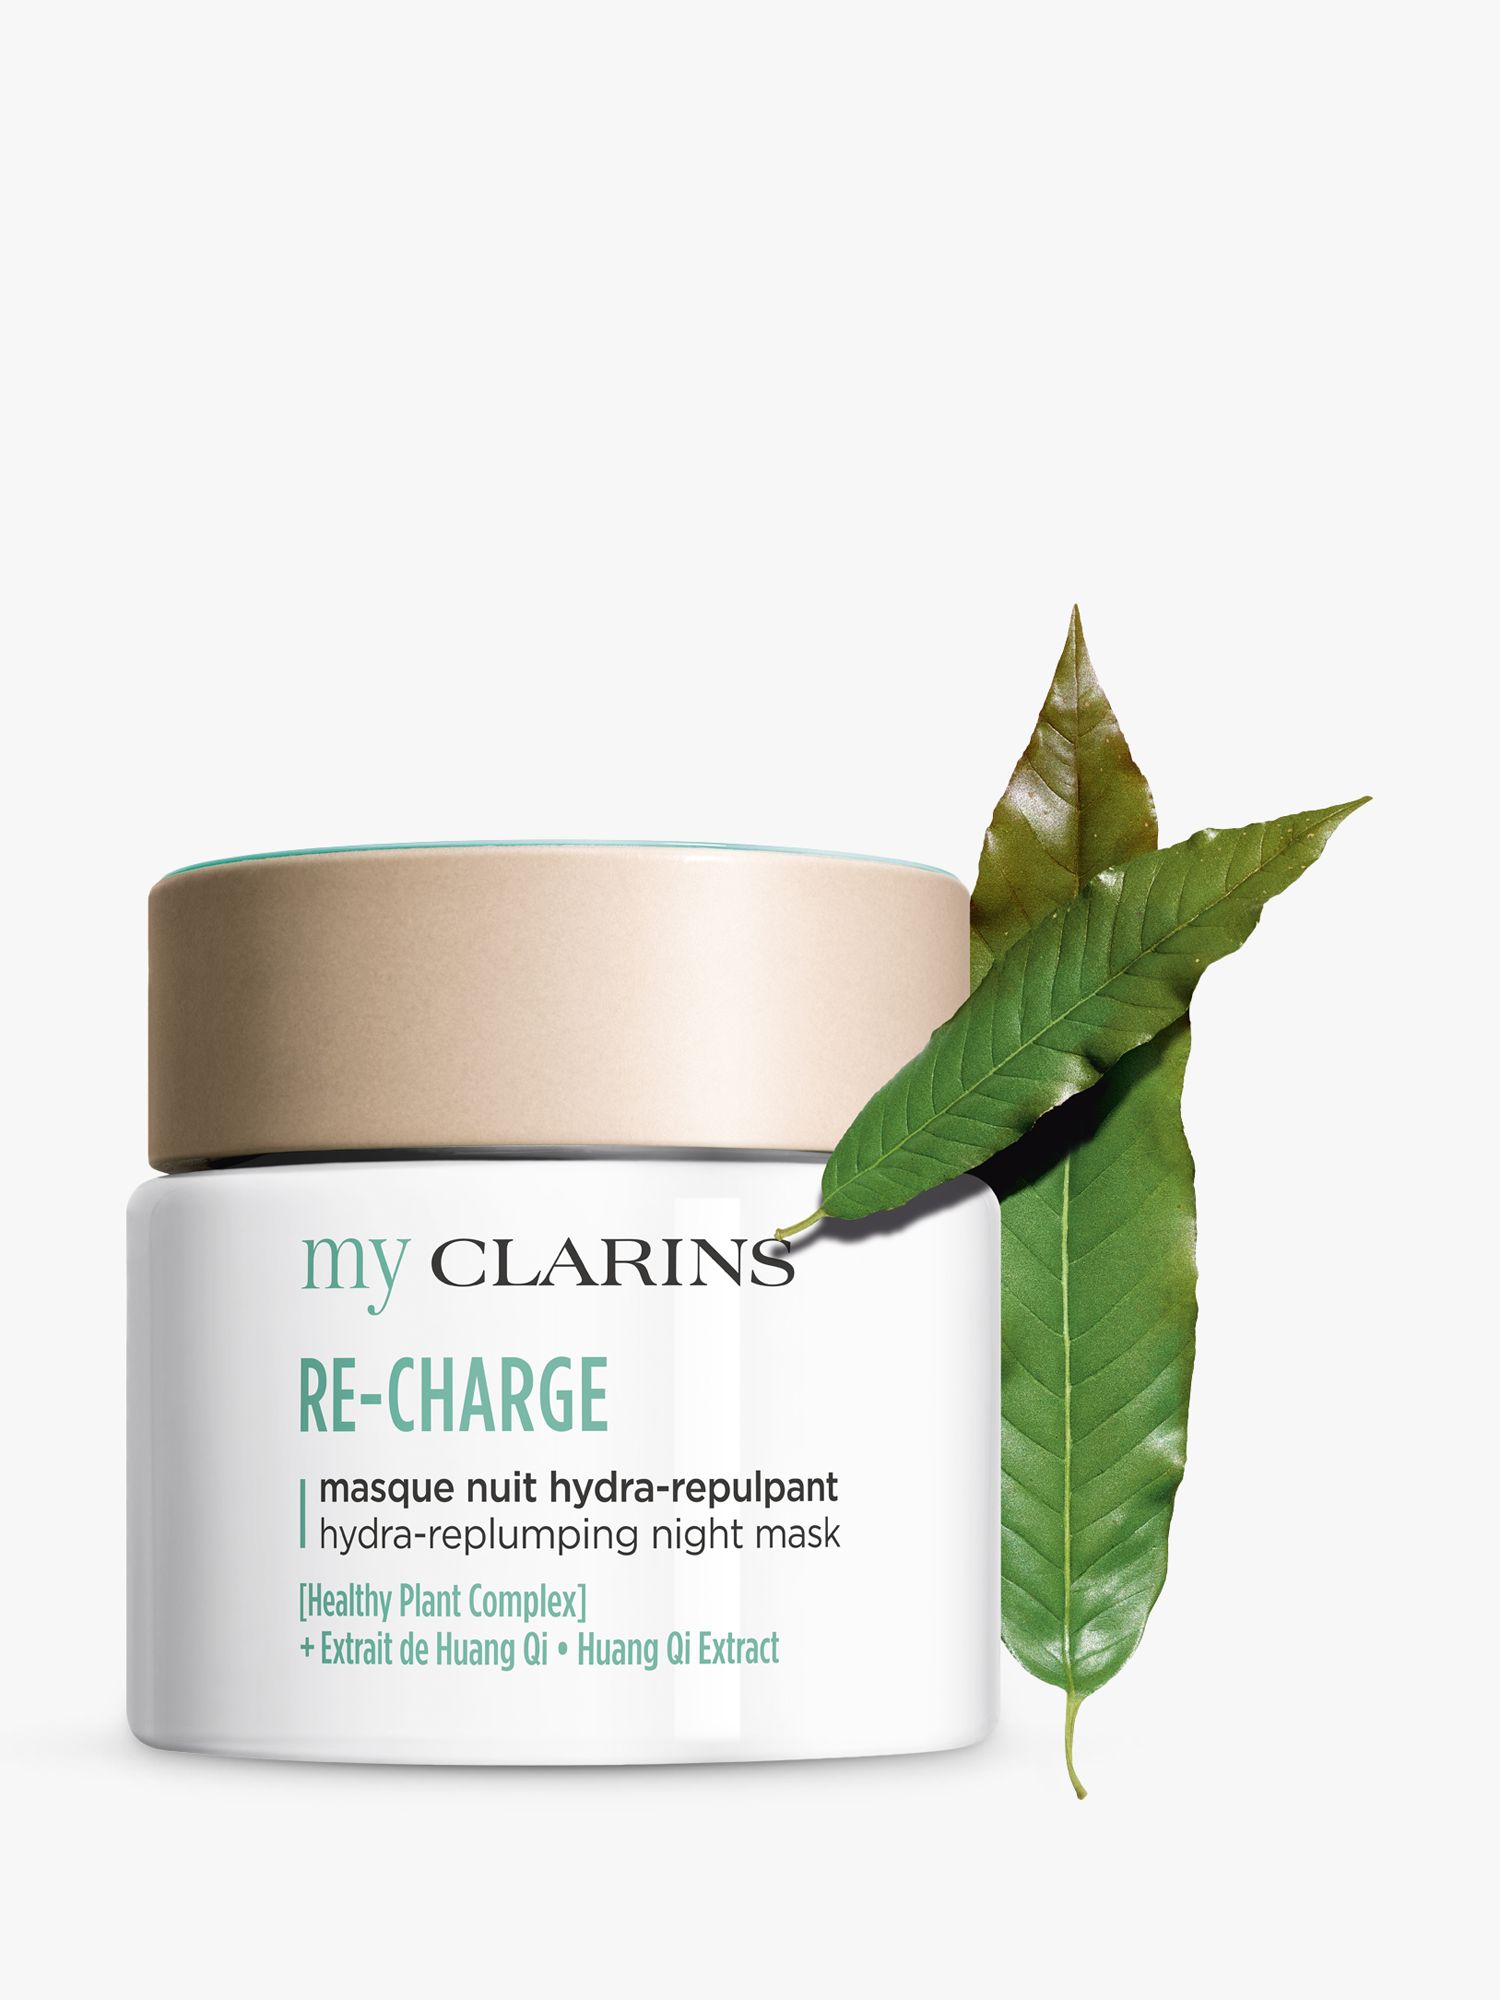 Clarins My Clarins RE-CHARGE Hydra-Replumping Night Mask, 50ml 2